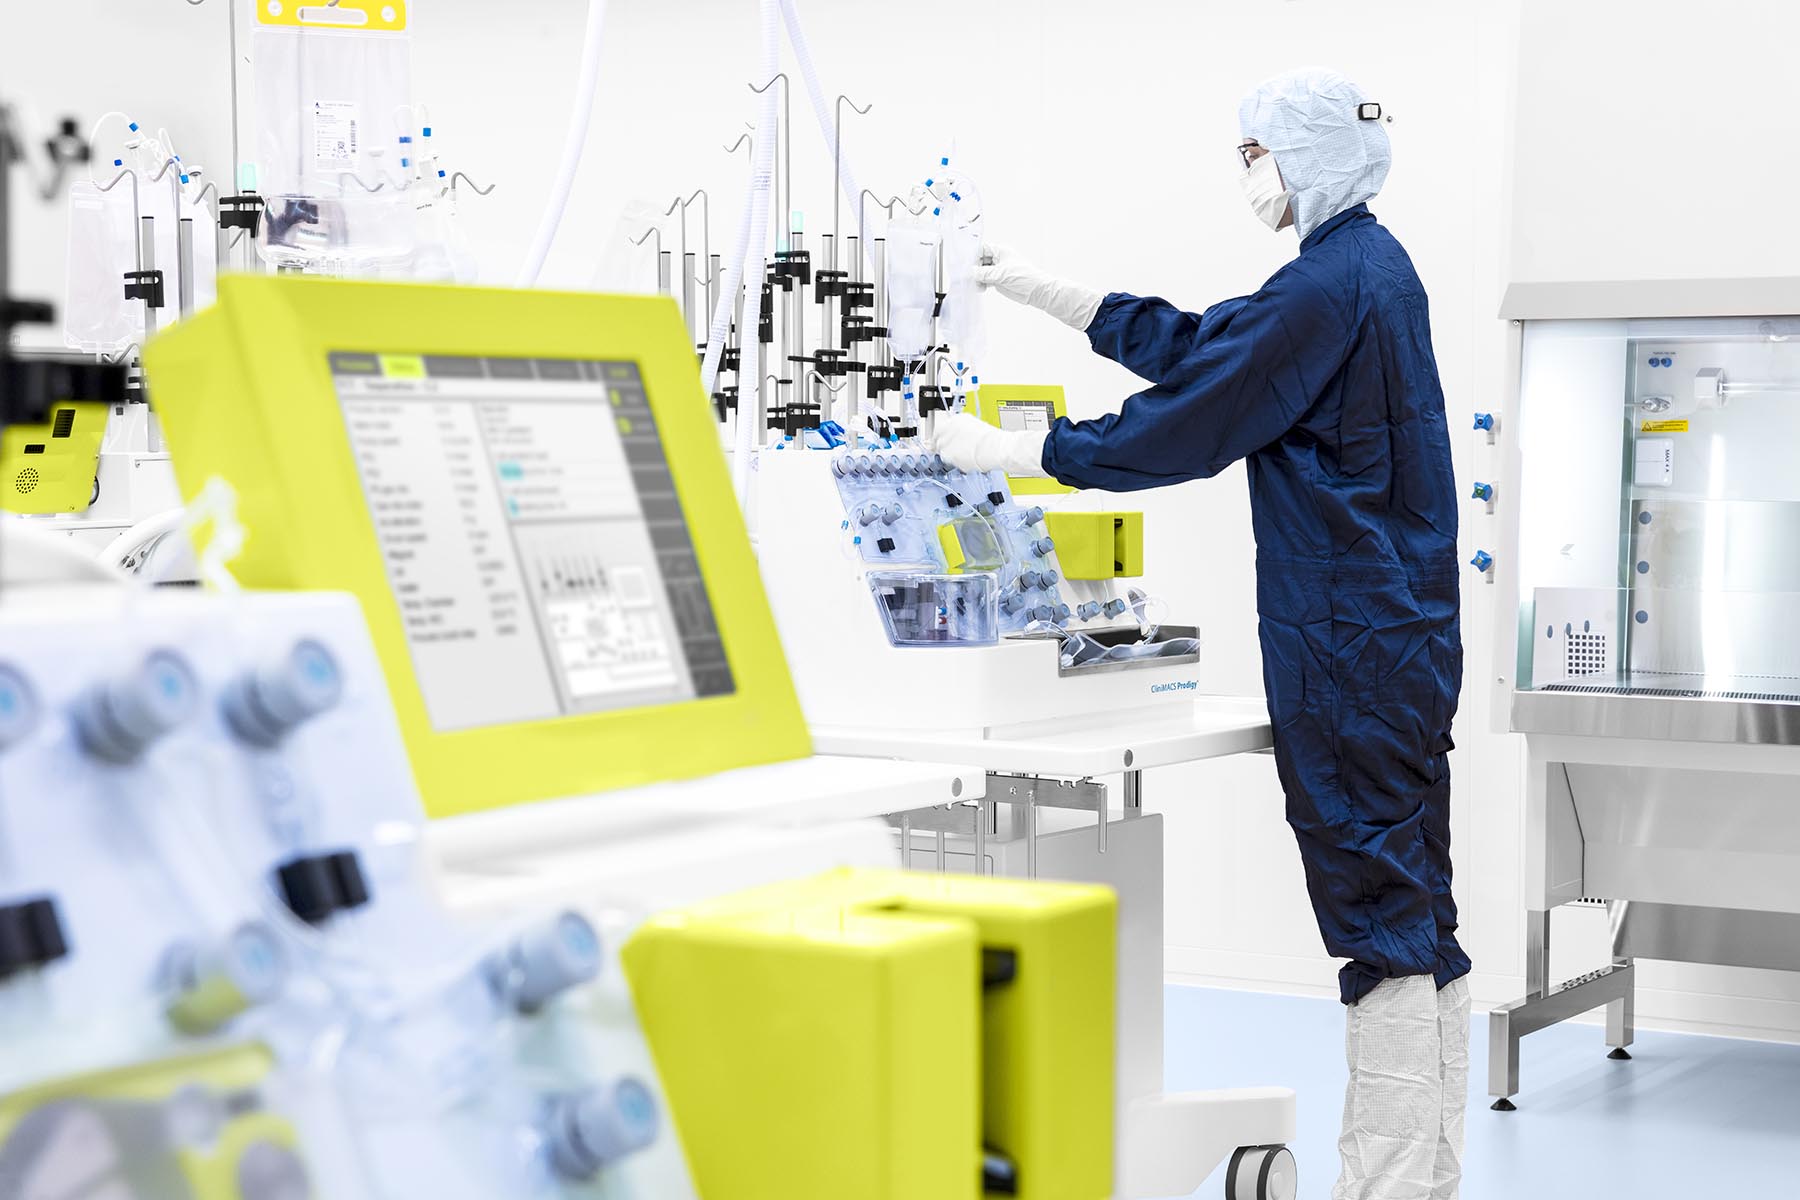 The CliniMACS Cell Factory at Miltenyi Biotec's facilities in Germany automates the production of cell therapy for patients with blood cancer.